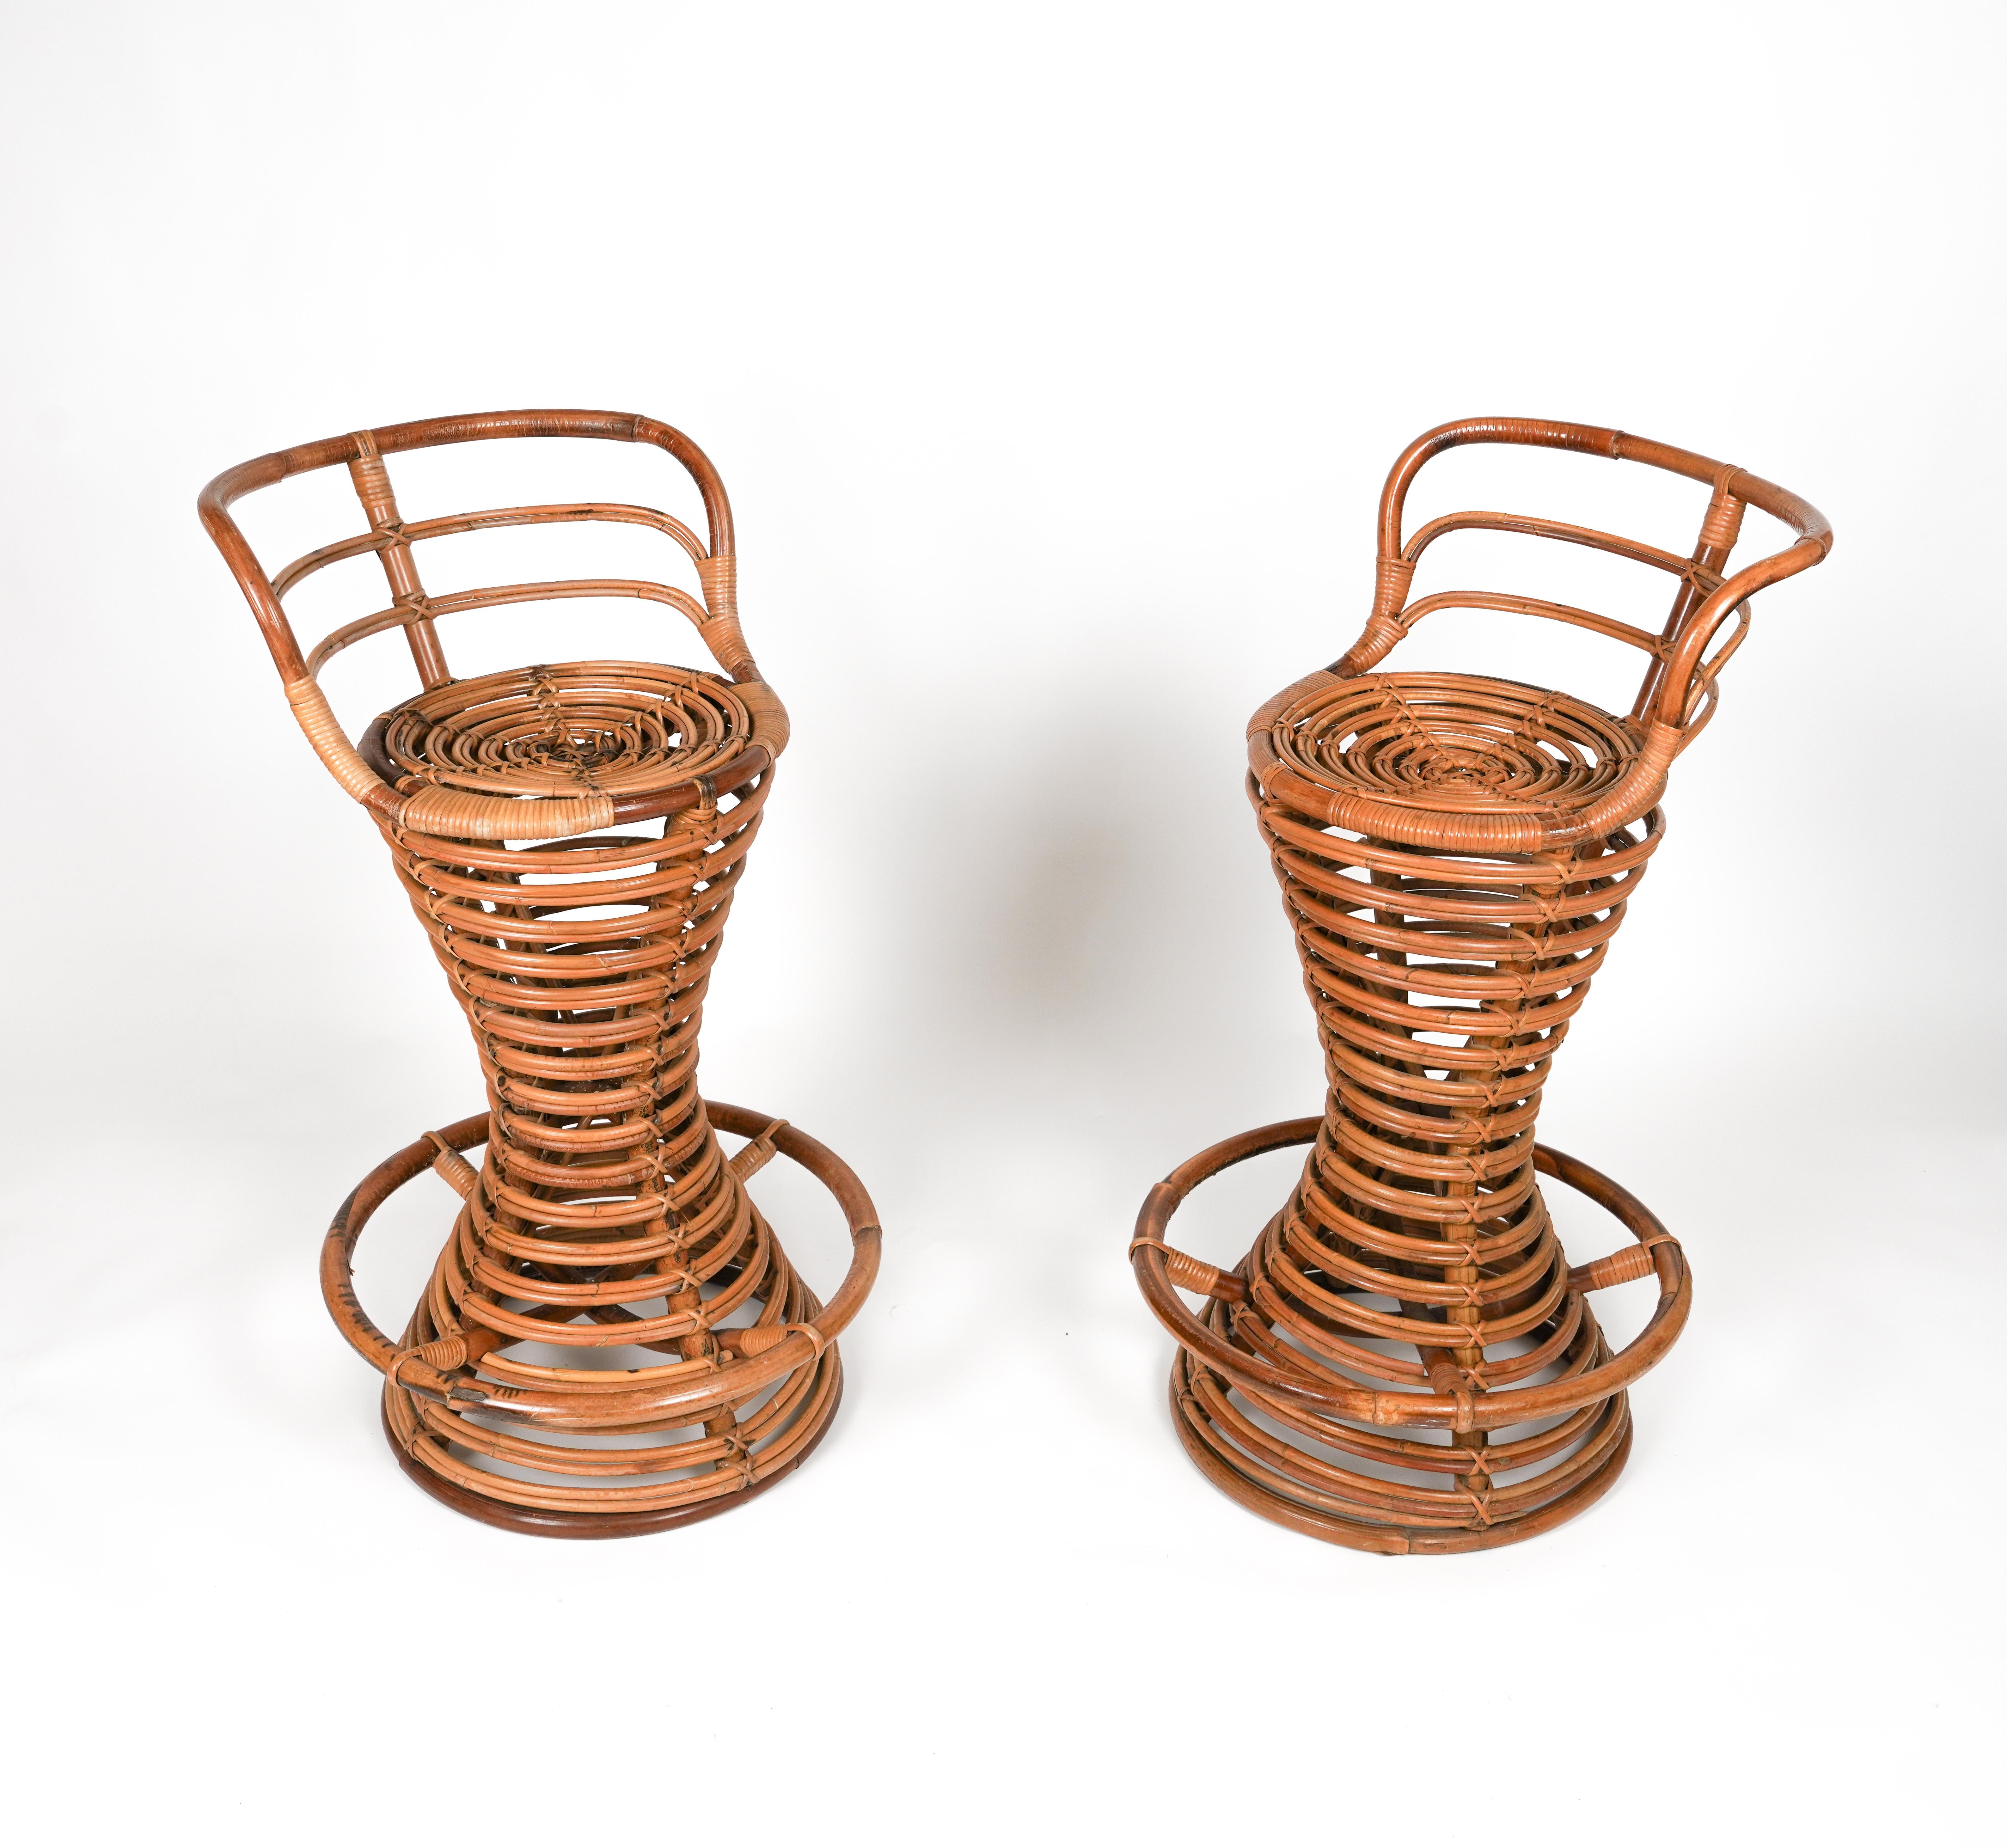 Midcentury Rattan and Bamboo Pair of Bar Stools Tito Agnoli Style, Italy 1960s For Sale 6